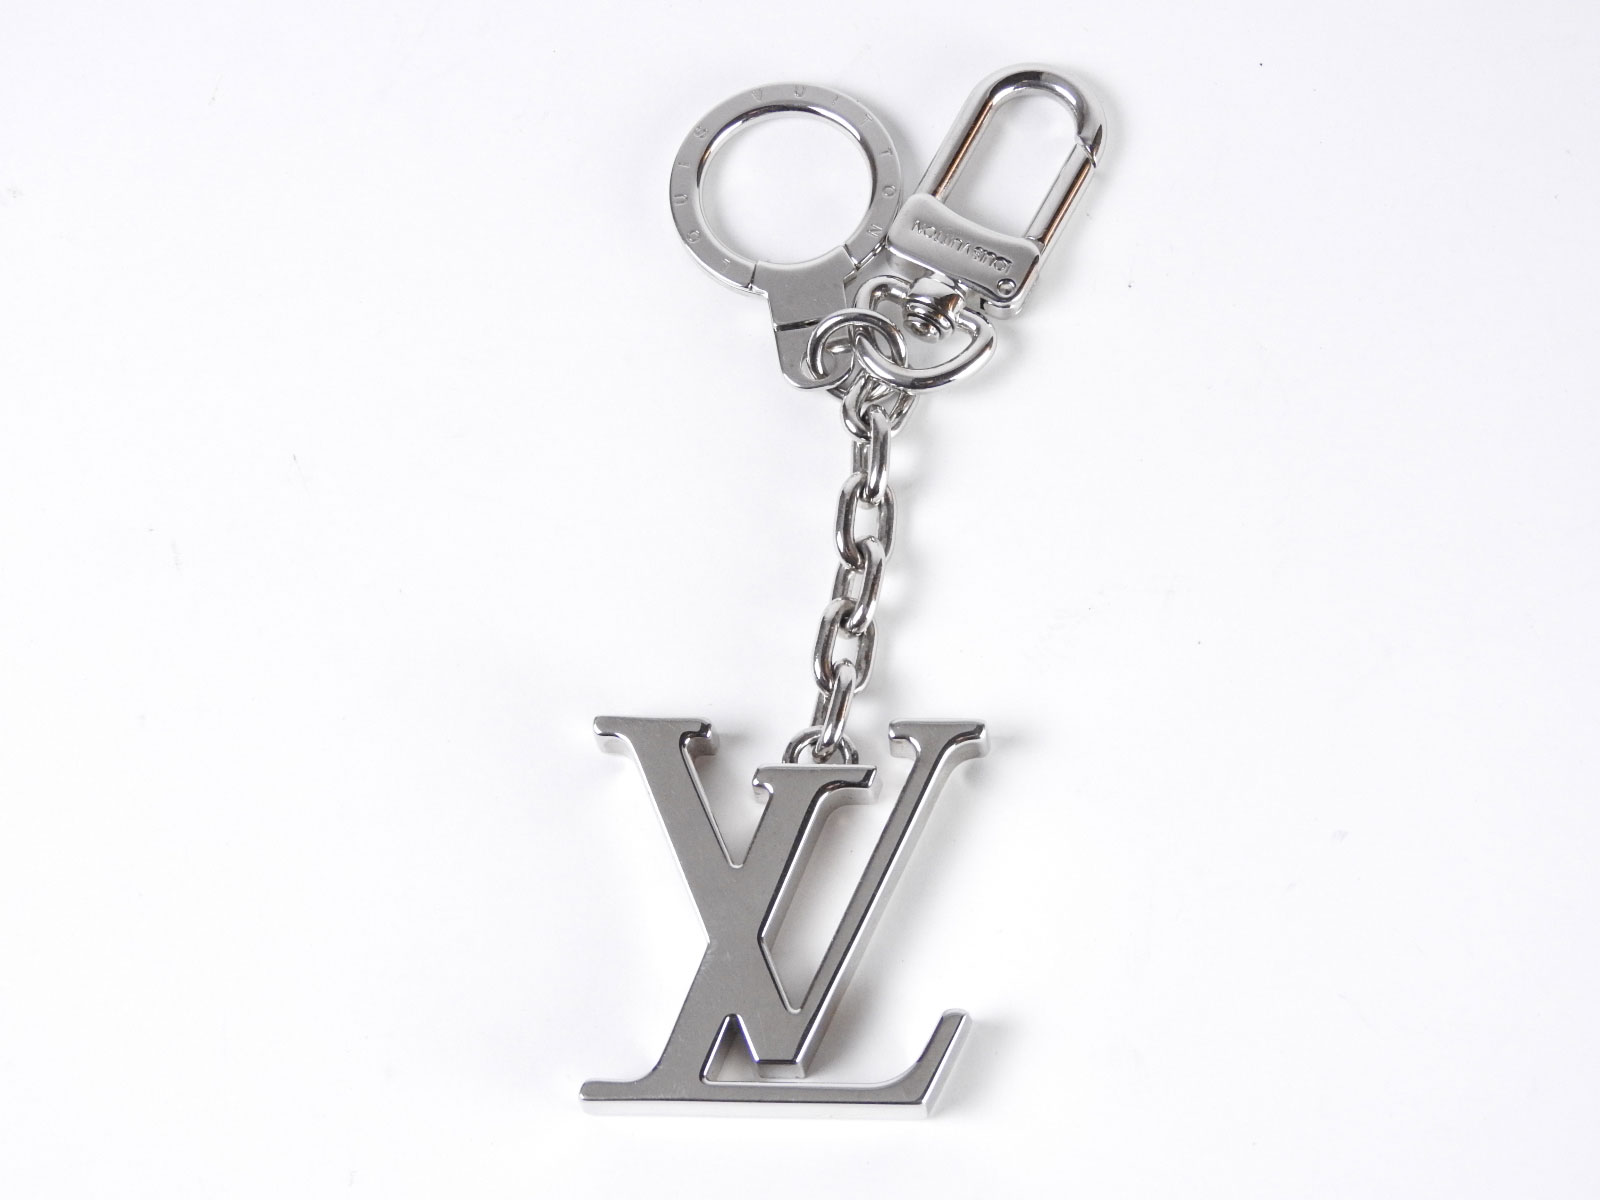 Auth LOUIS VUITTON Porte Cles Initilal Key Holder Ring Charm Silver M65071 A3264